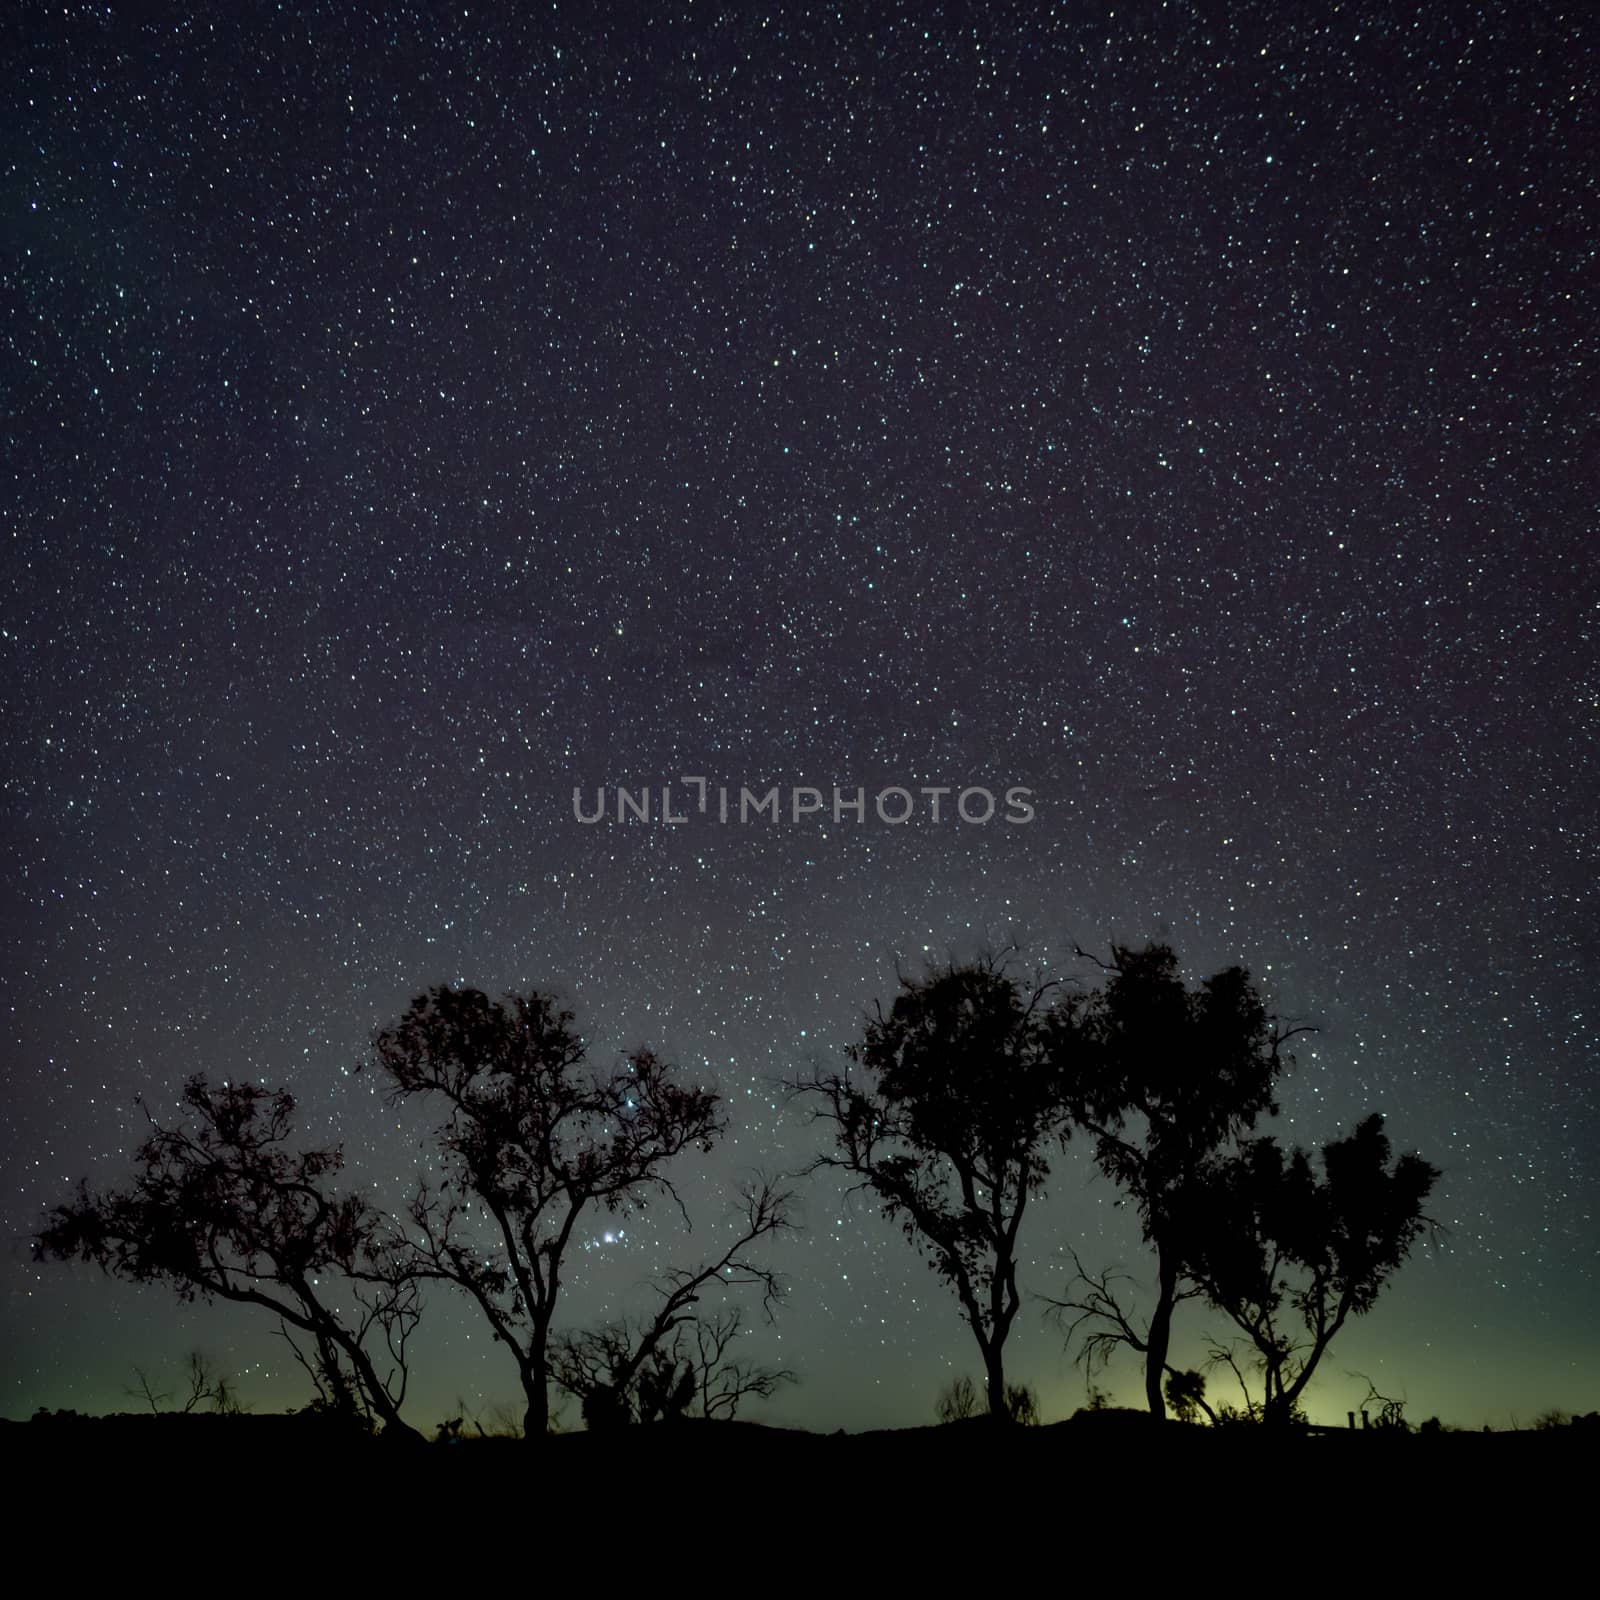 Silhouette of trees in front of dark night sky in southern hemisphere Australia by MXW_Stock